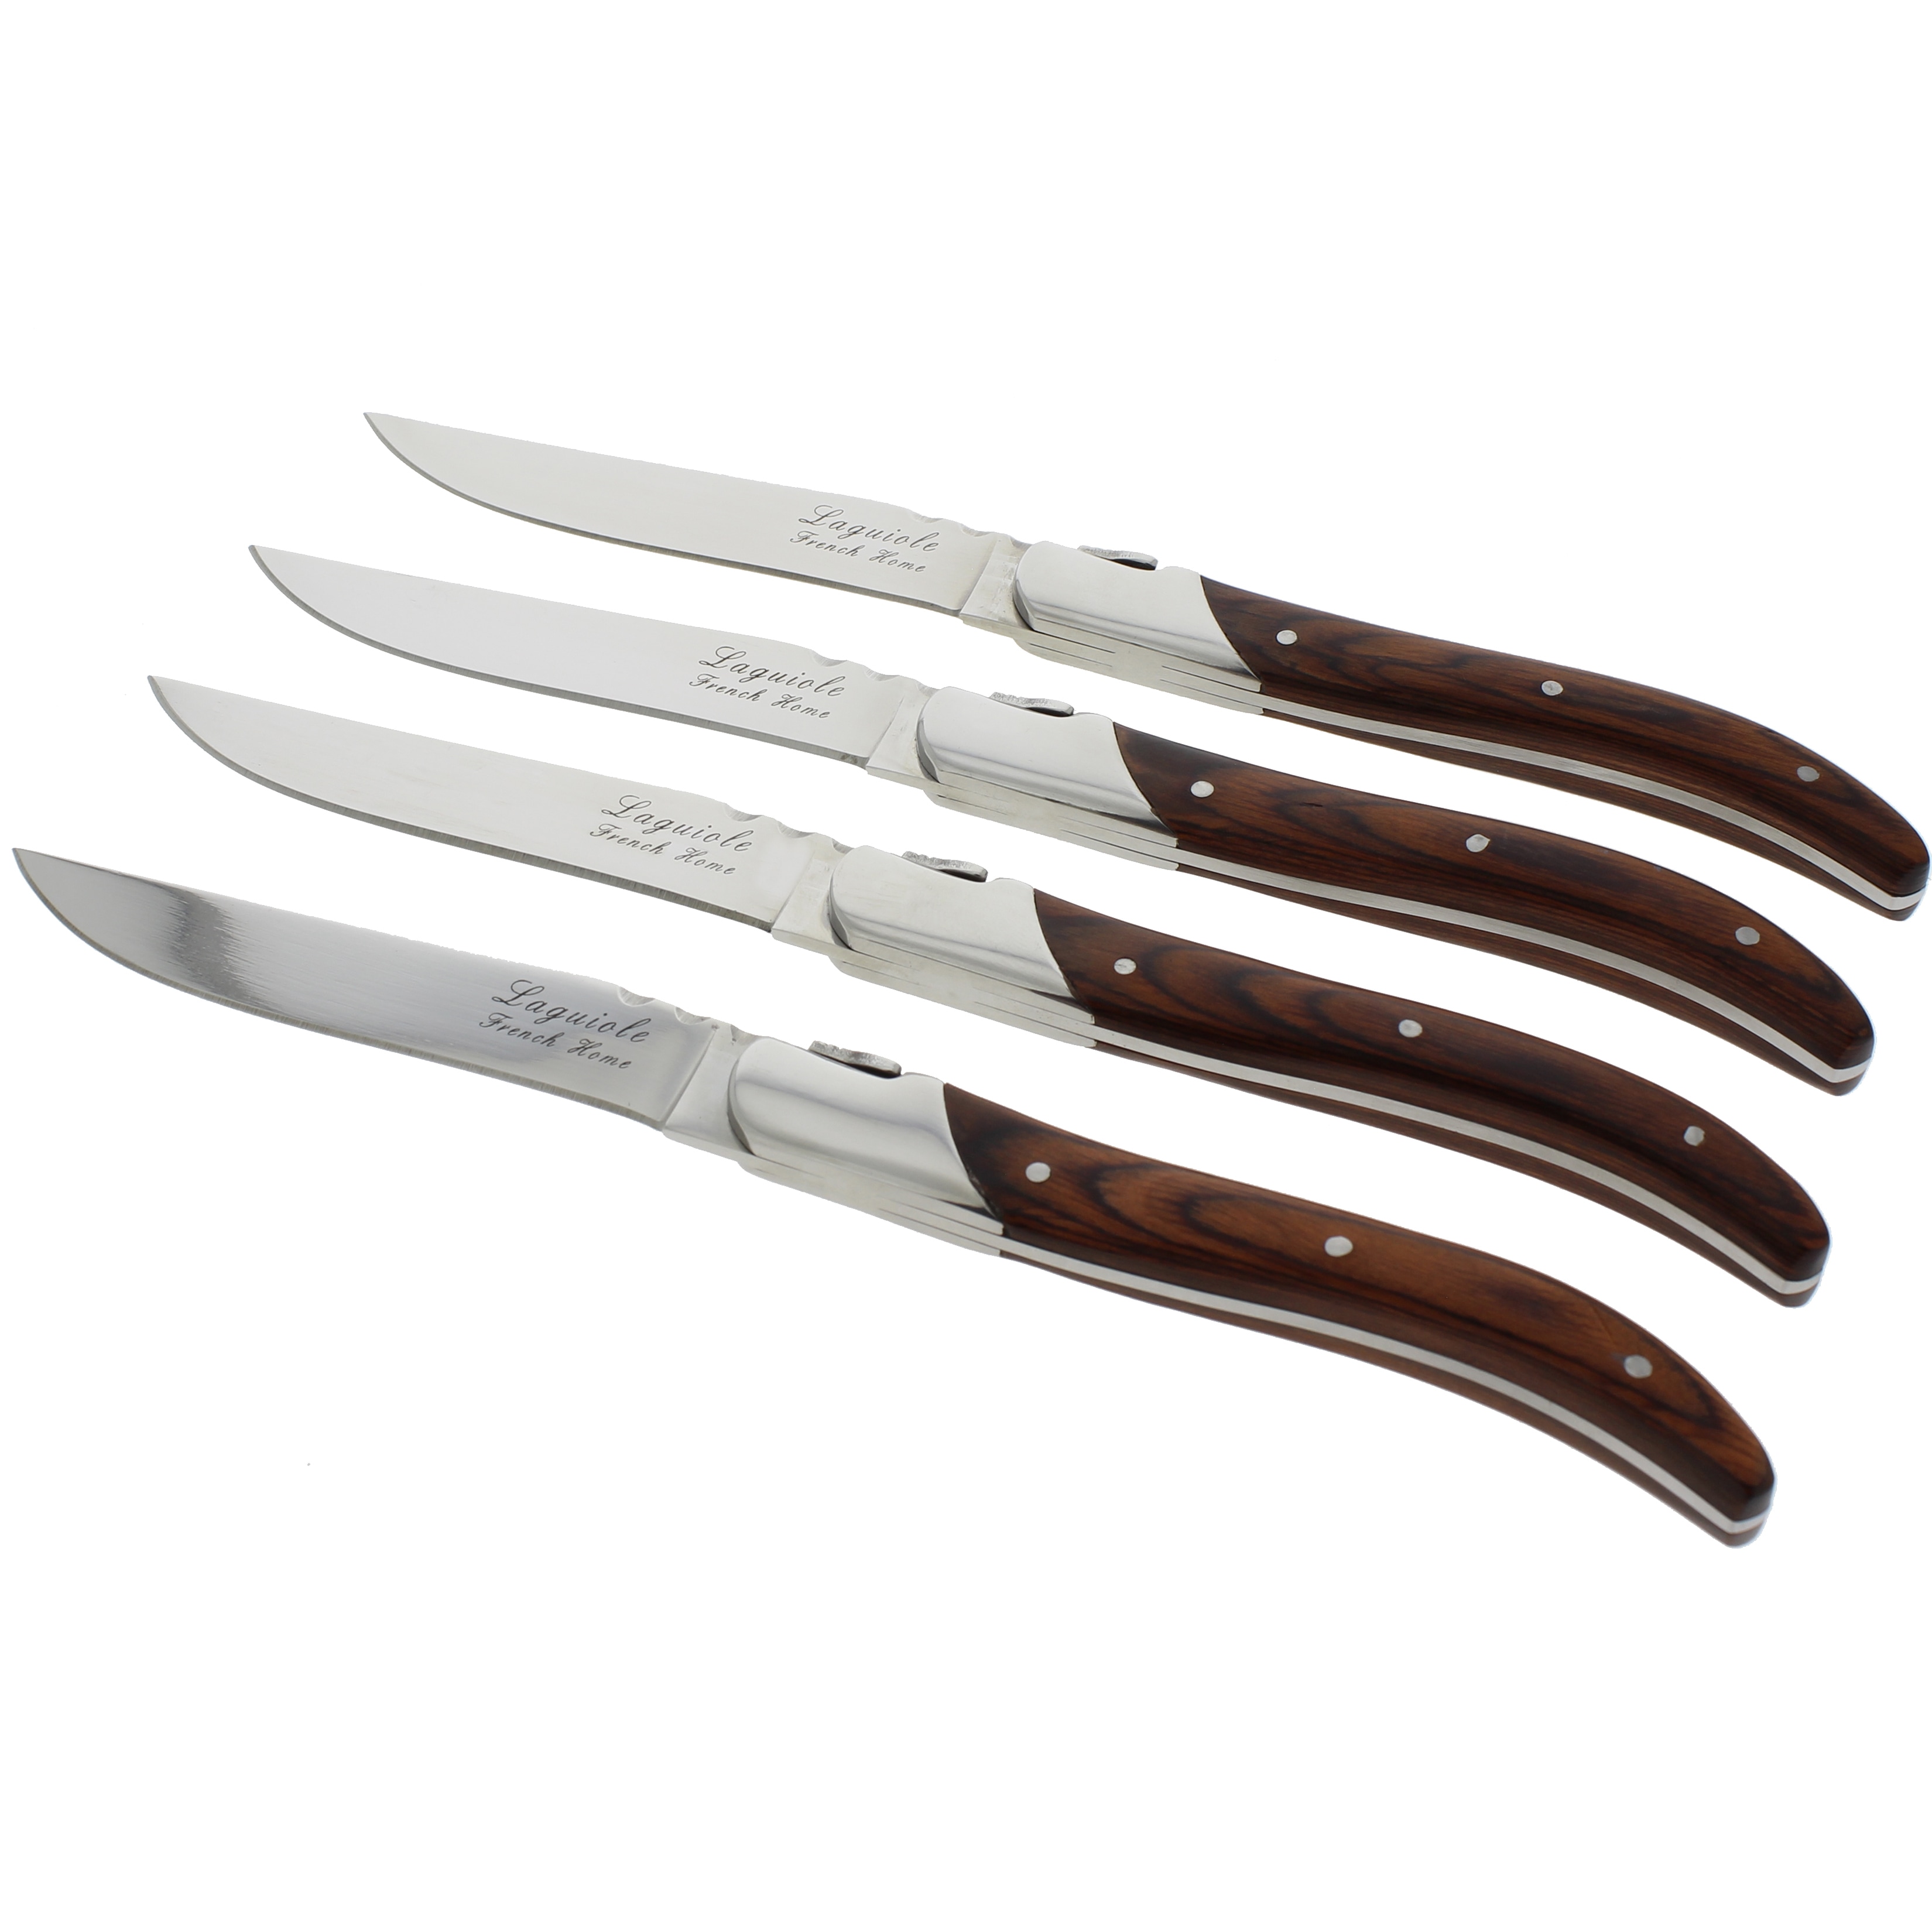 https://ak1.ostkcdn.com/images/products/10701107/French-Home-Set-of-4-Laguiole-Connoisseur-Rosewood-Steak-Knives-1d675031-b508-4637-8ee4-9f52be898ed6.jpg